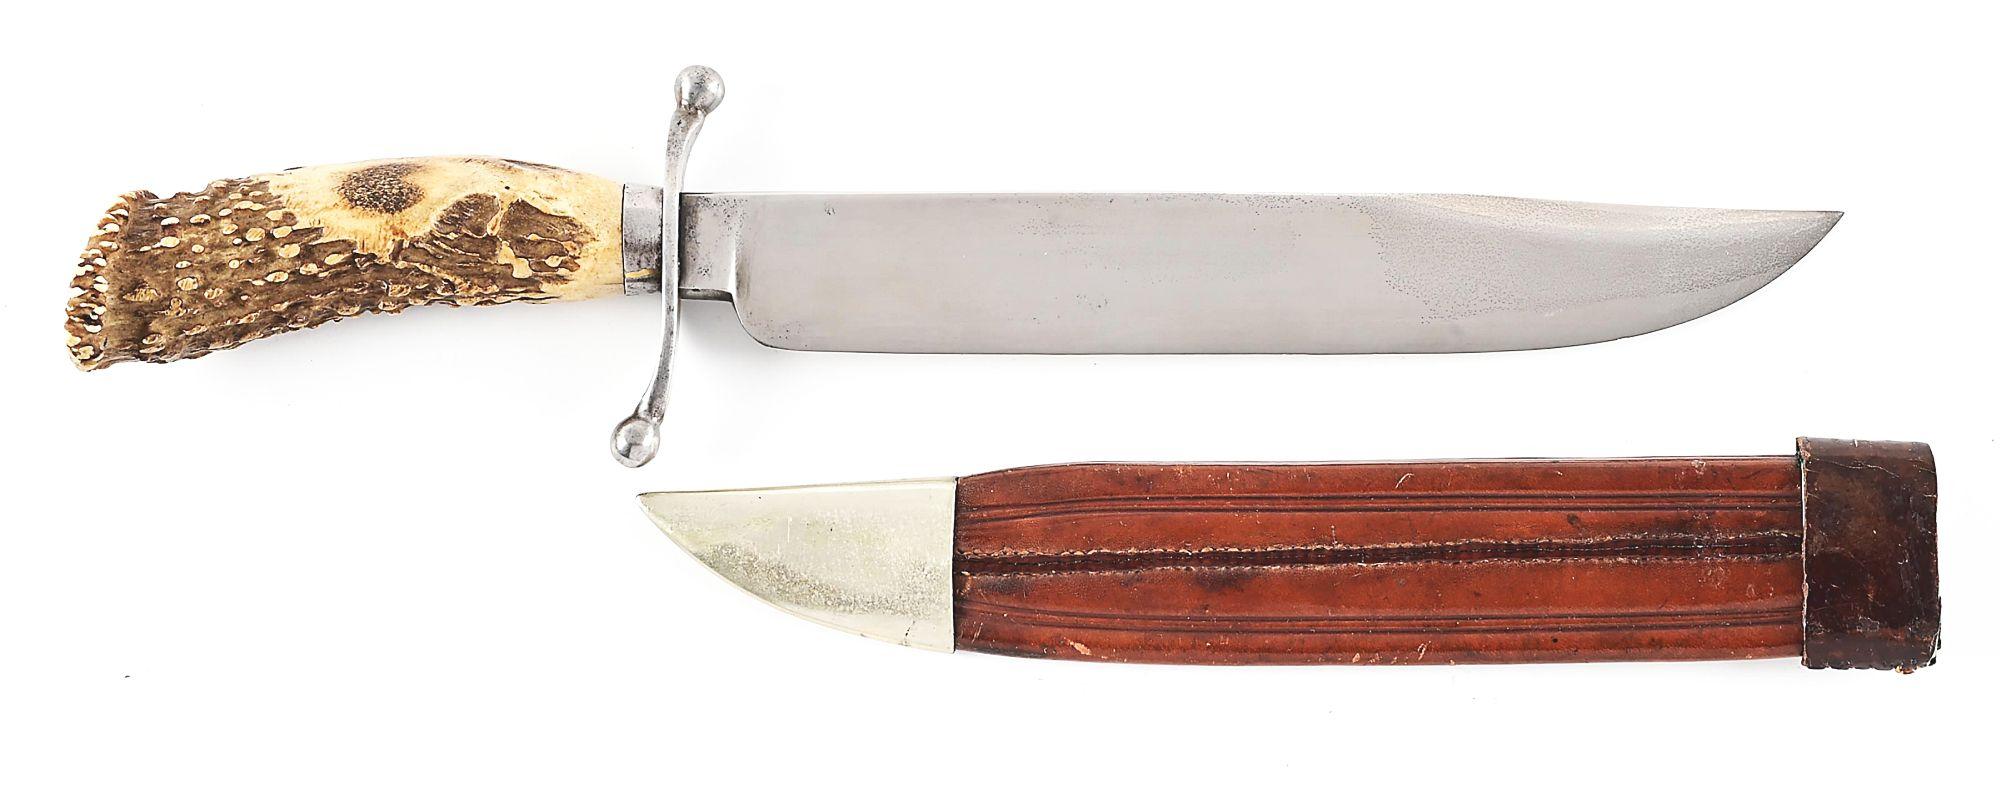 LARGE STAG HANDLED BOWIE KNIFE BY CARVER & CO.